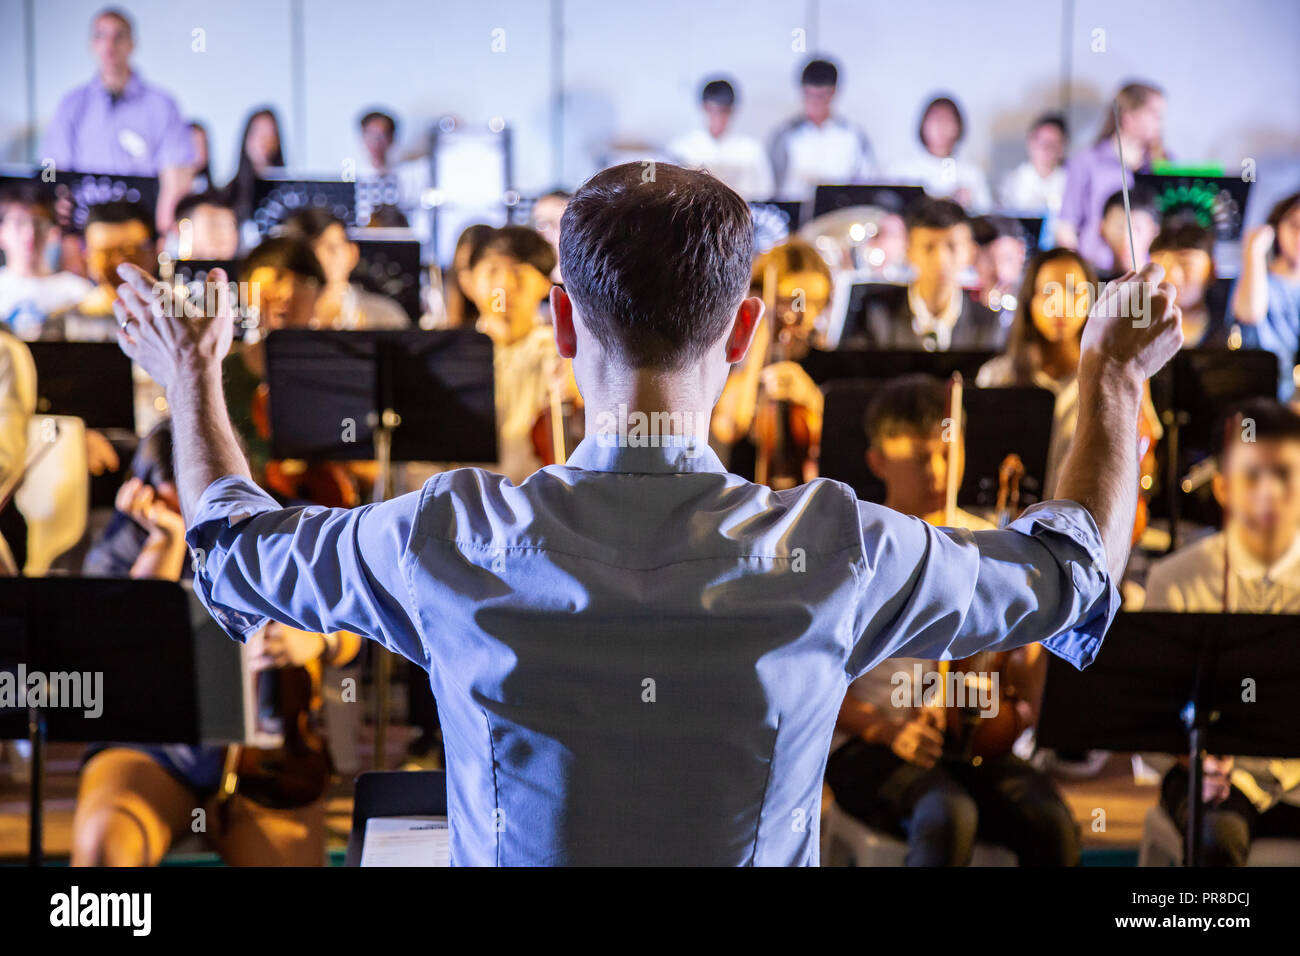 Male school conductor conductiong his student band to perform music in a school concert Stock Photo